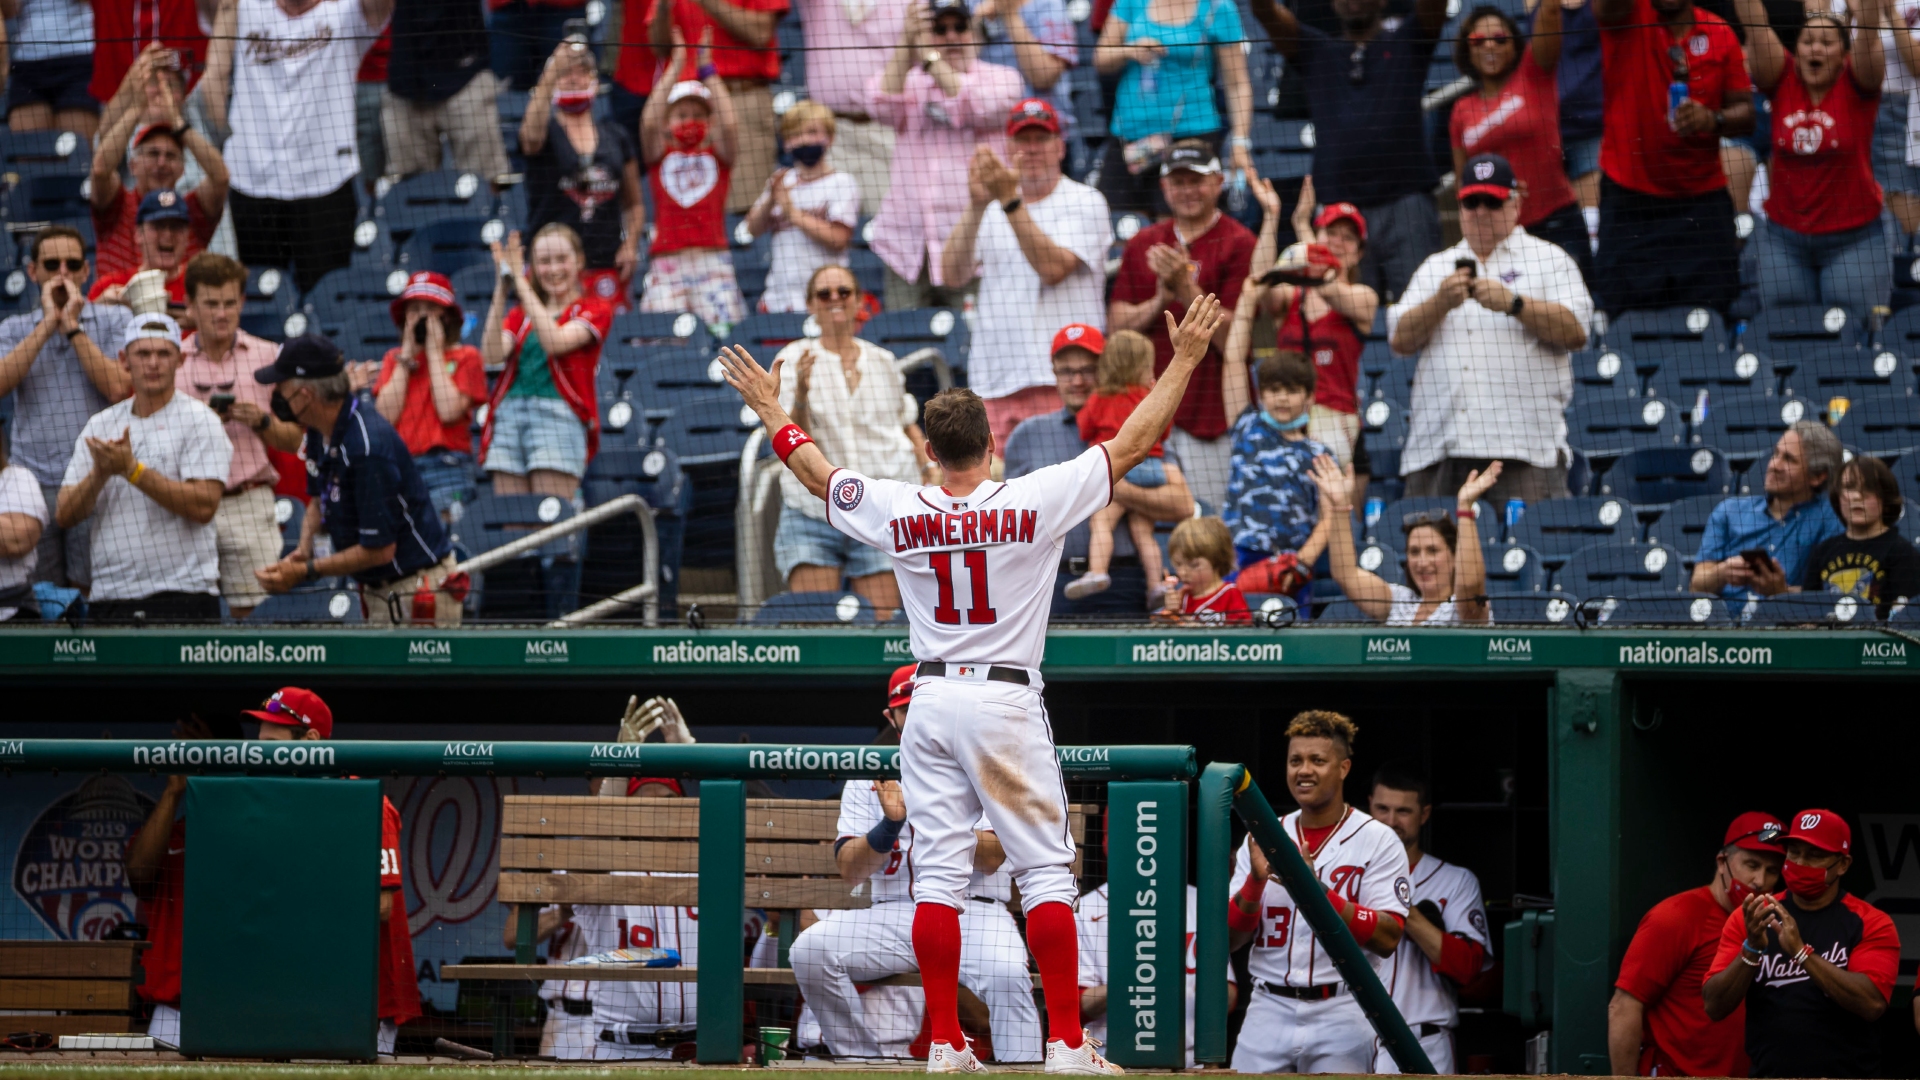 Ryan Zimmerman number retirement means 11 will be retired by three